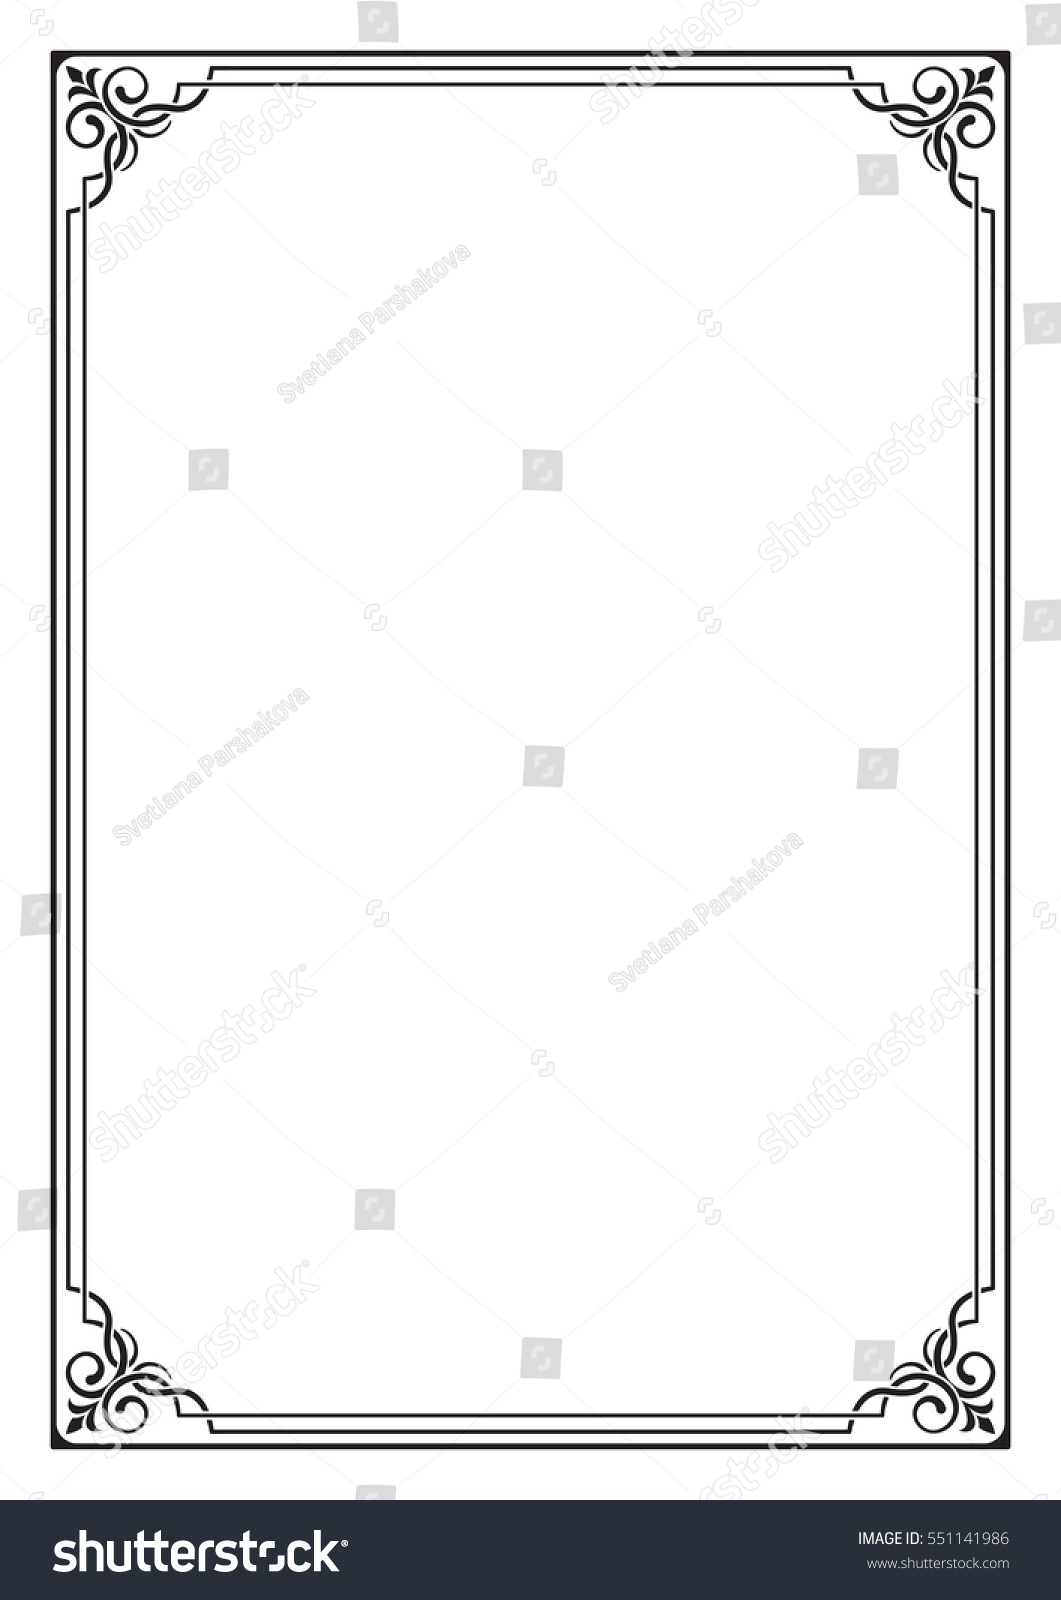 Ornate Black Square Frame Corners A4 Stock Vector (Royalty Free ...